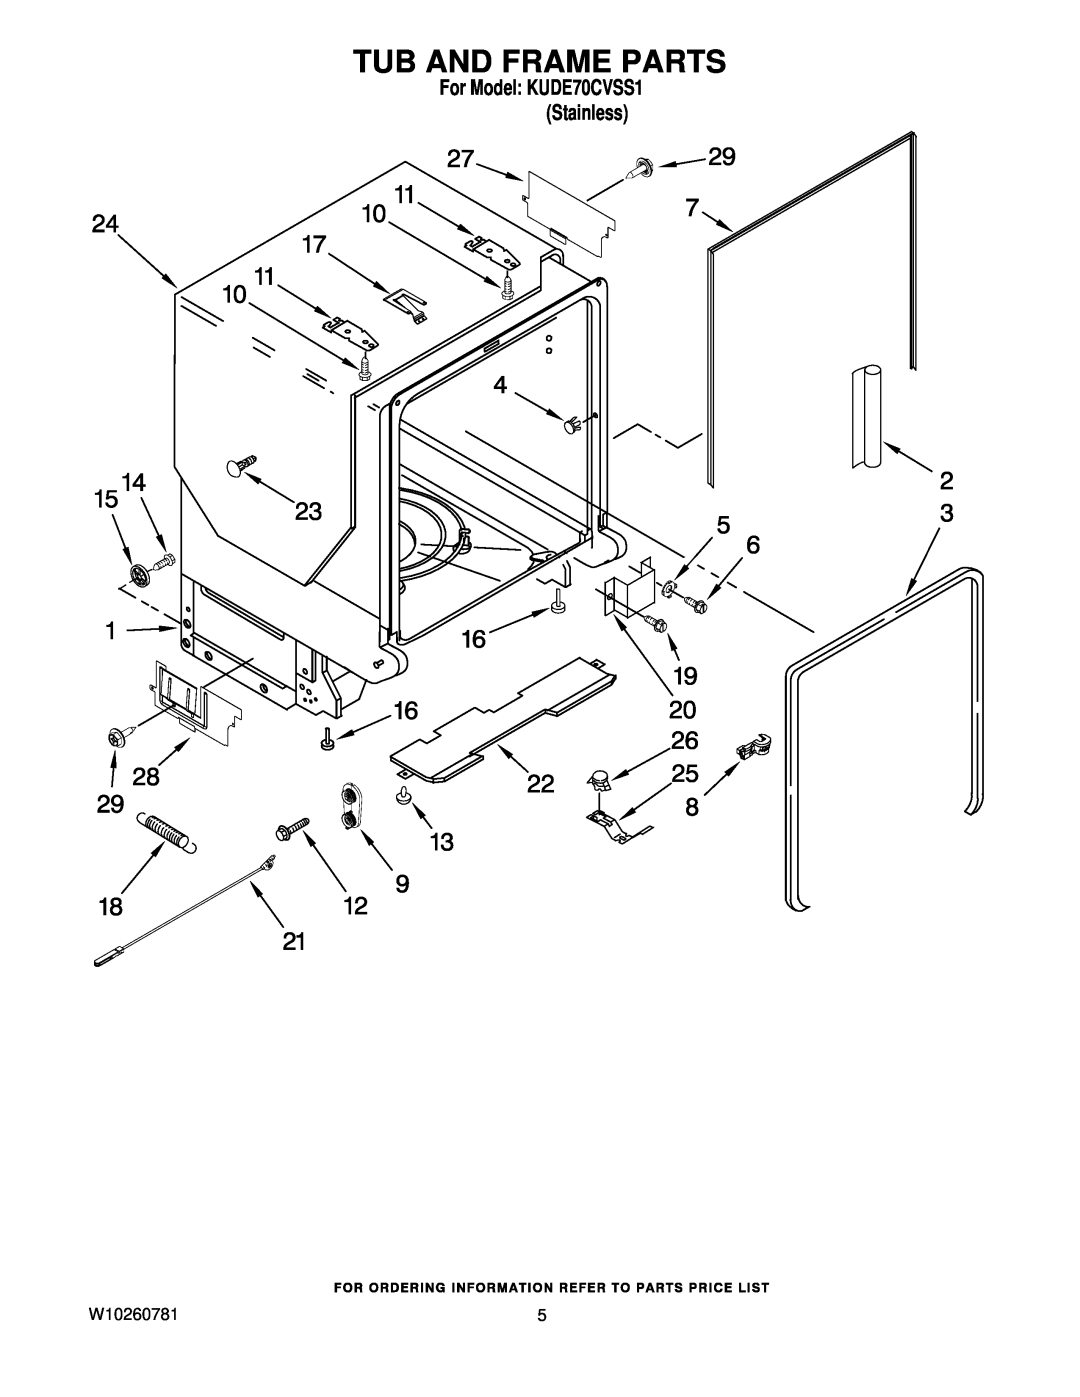 KitchenAid manual Tub And Frame Parts, W10260781, For Model KUDE70CVSS1 Stainless 